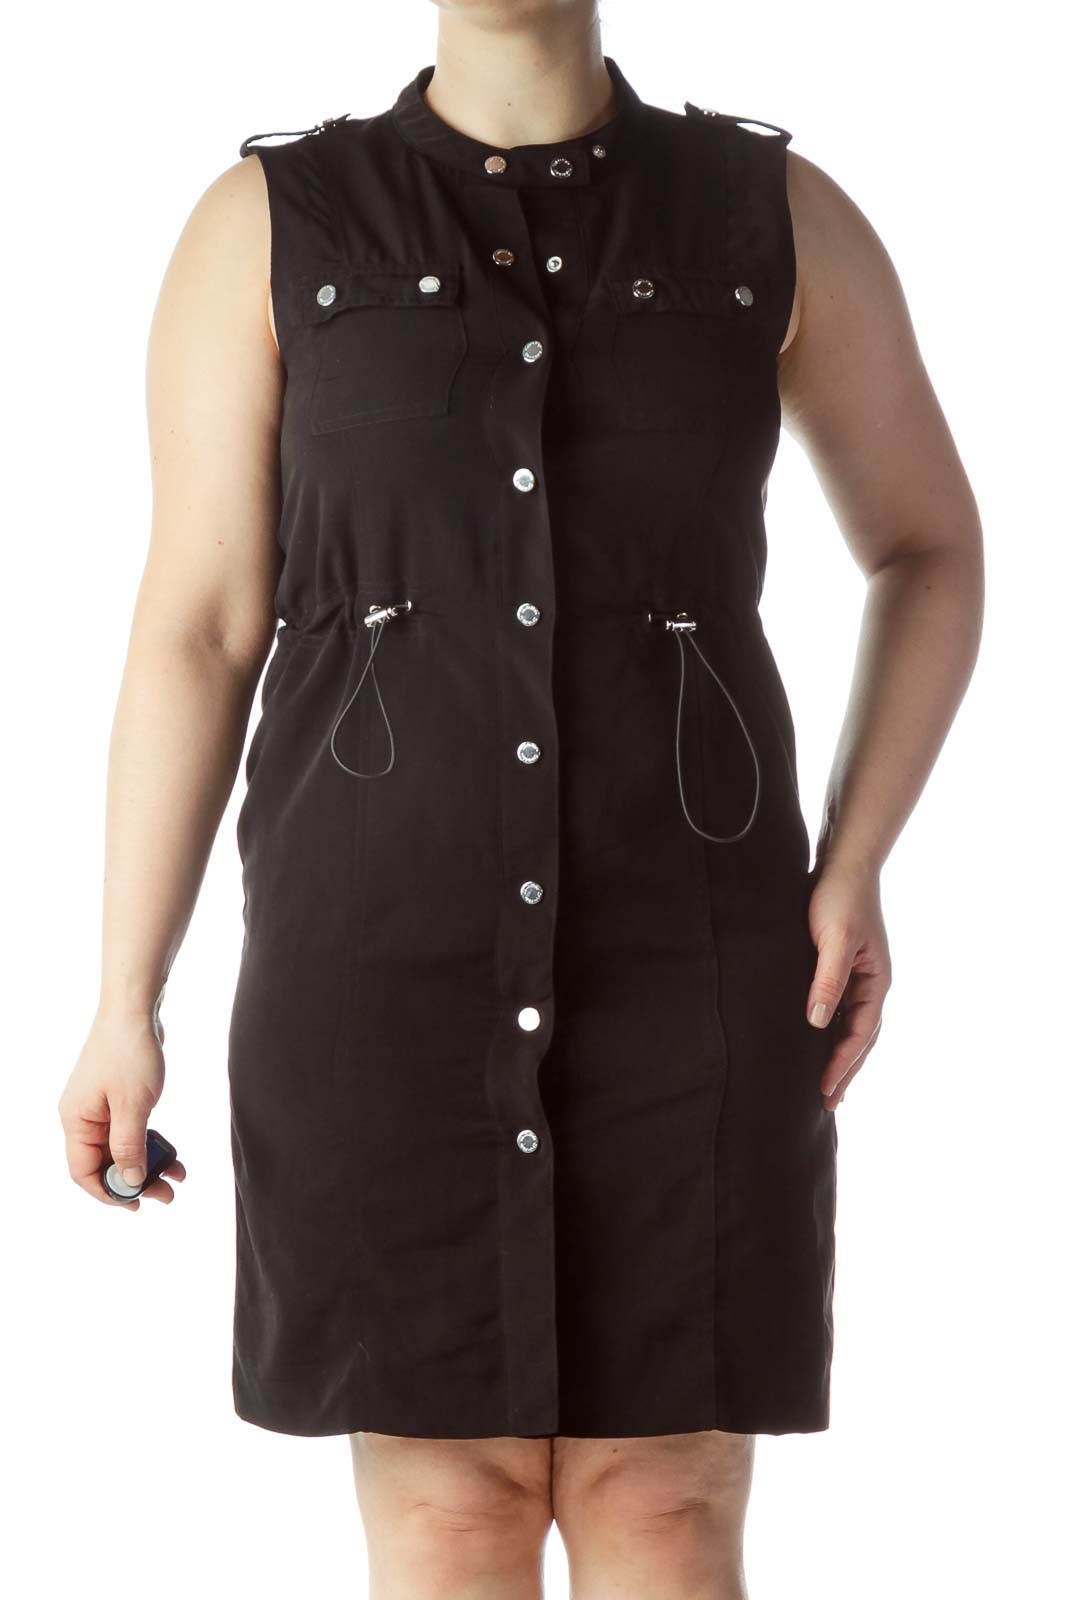 Black Snap Buttoned Sleeveless Dress Front